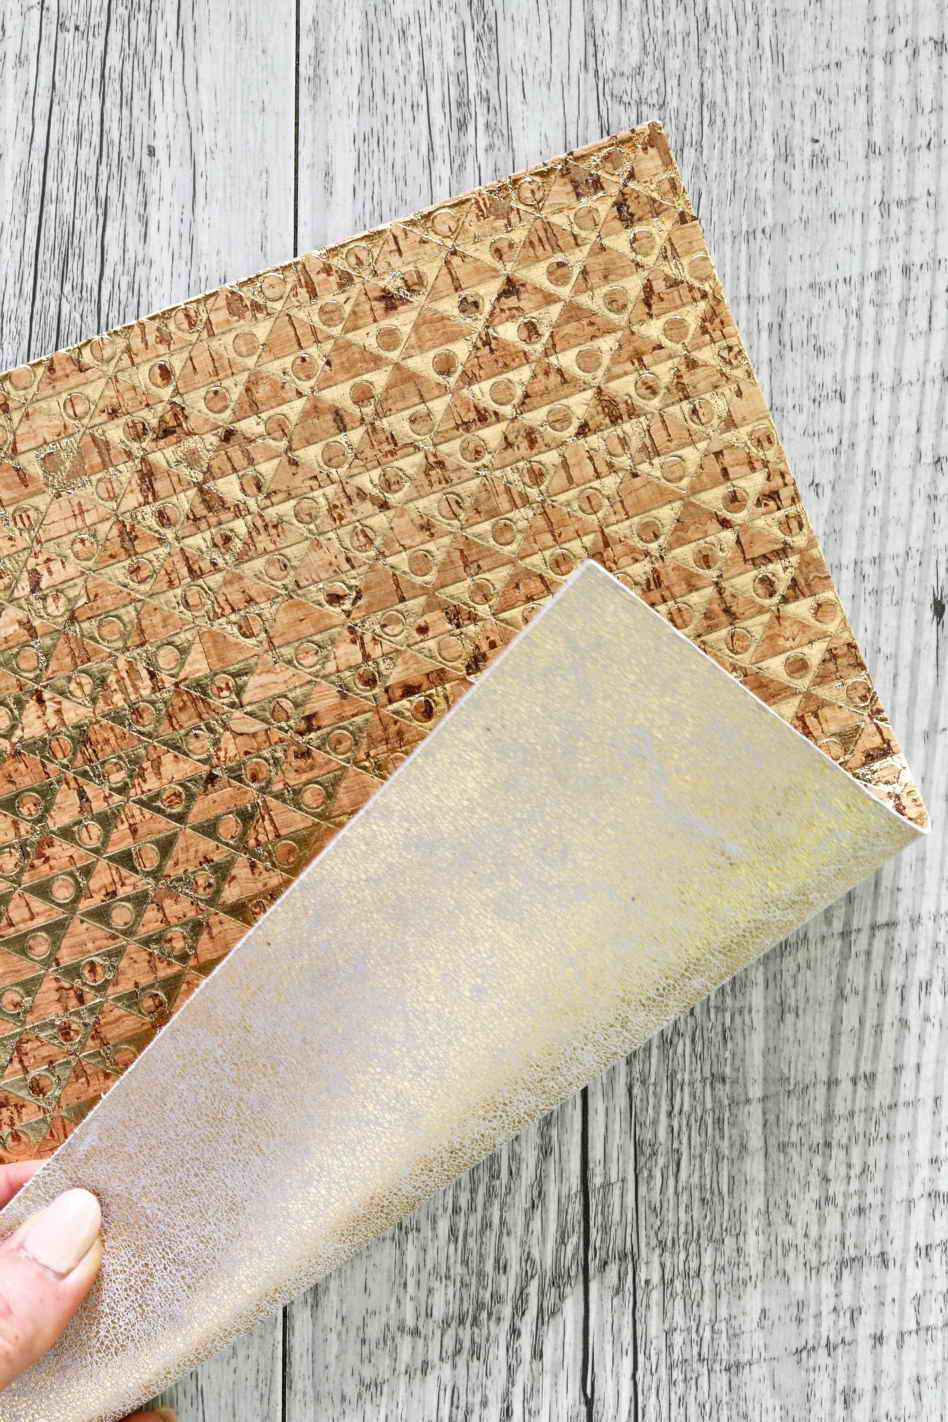 Multi-style A4 Vintage Soft Cork Fabric Sheet Gold Silver Synthetic Leather  DIY